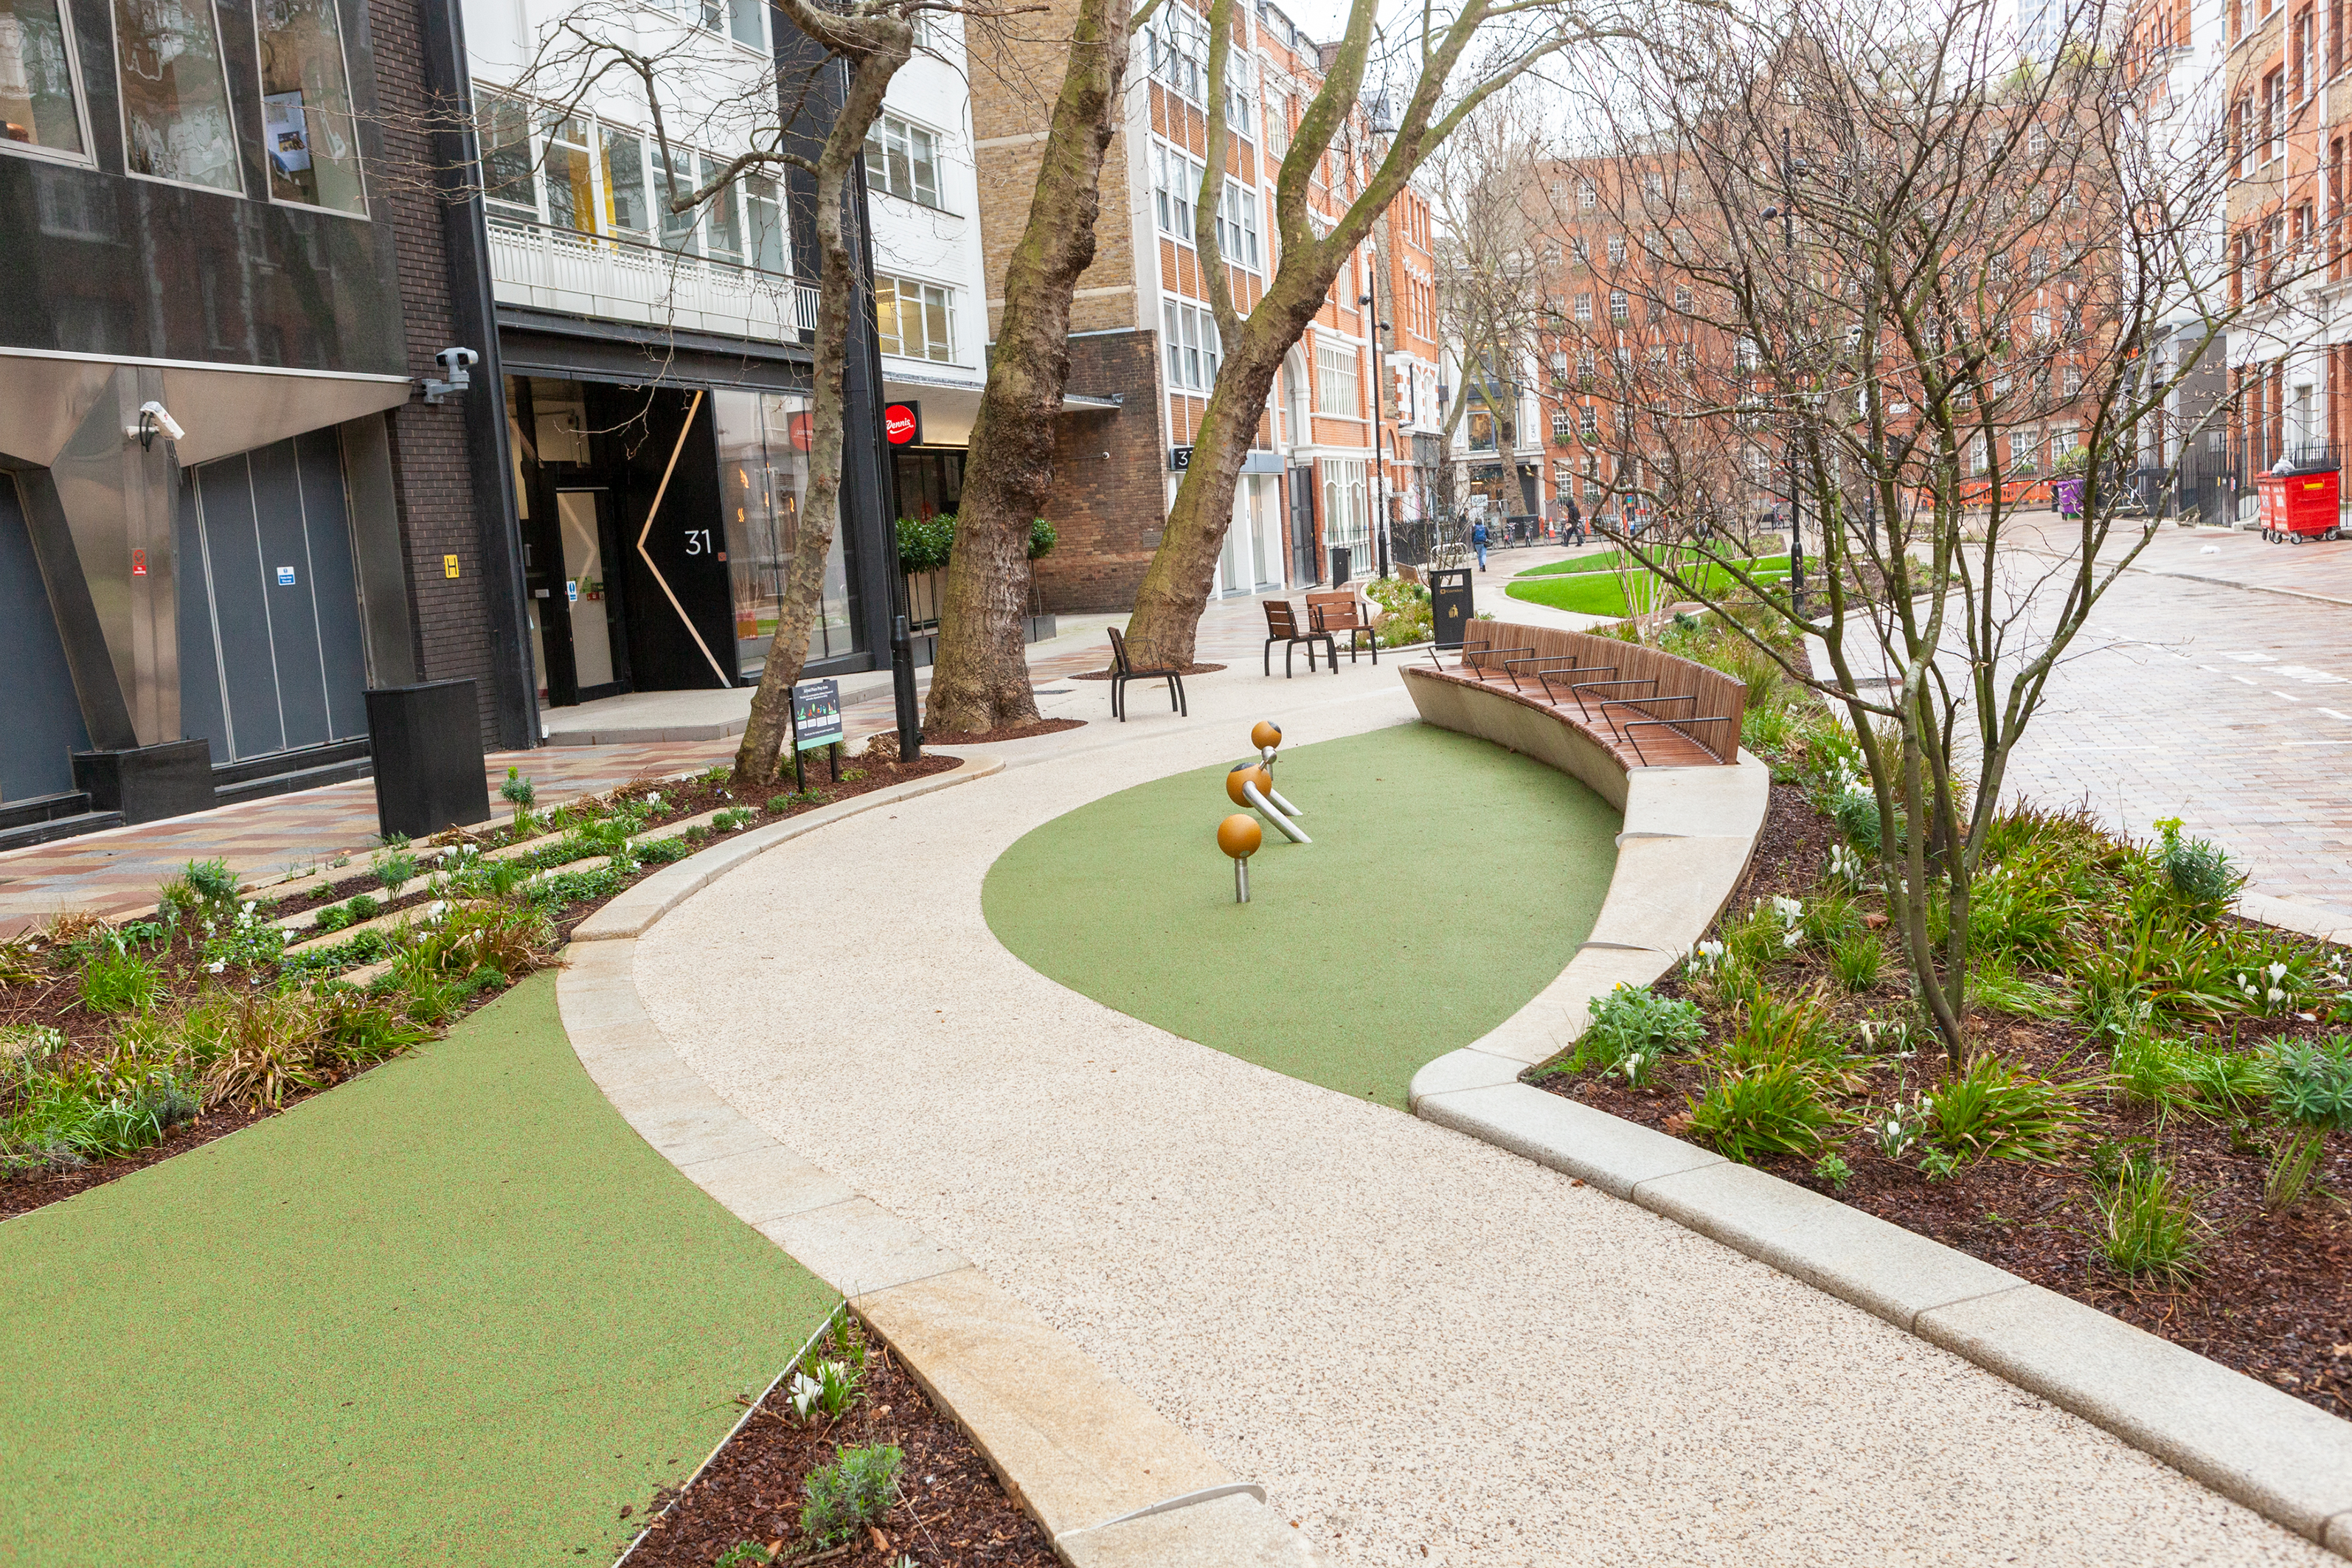 After - Play equipment, sweeping paths and beautiful new plants